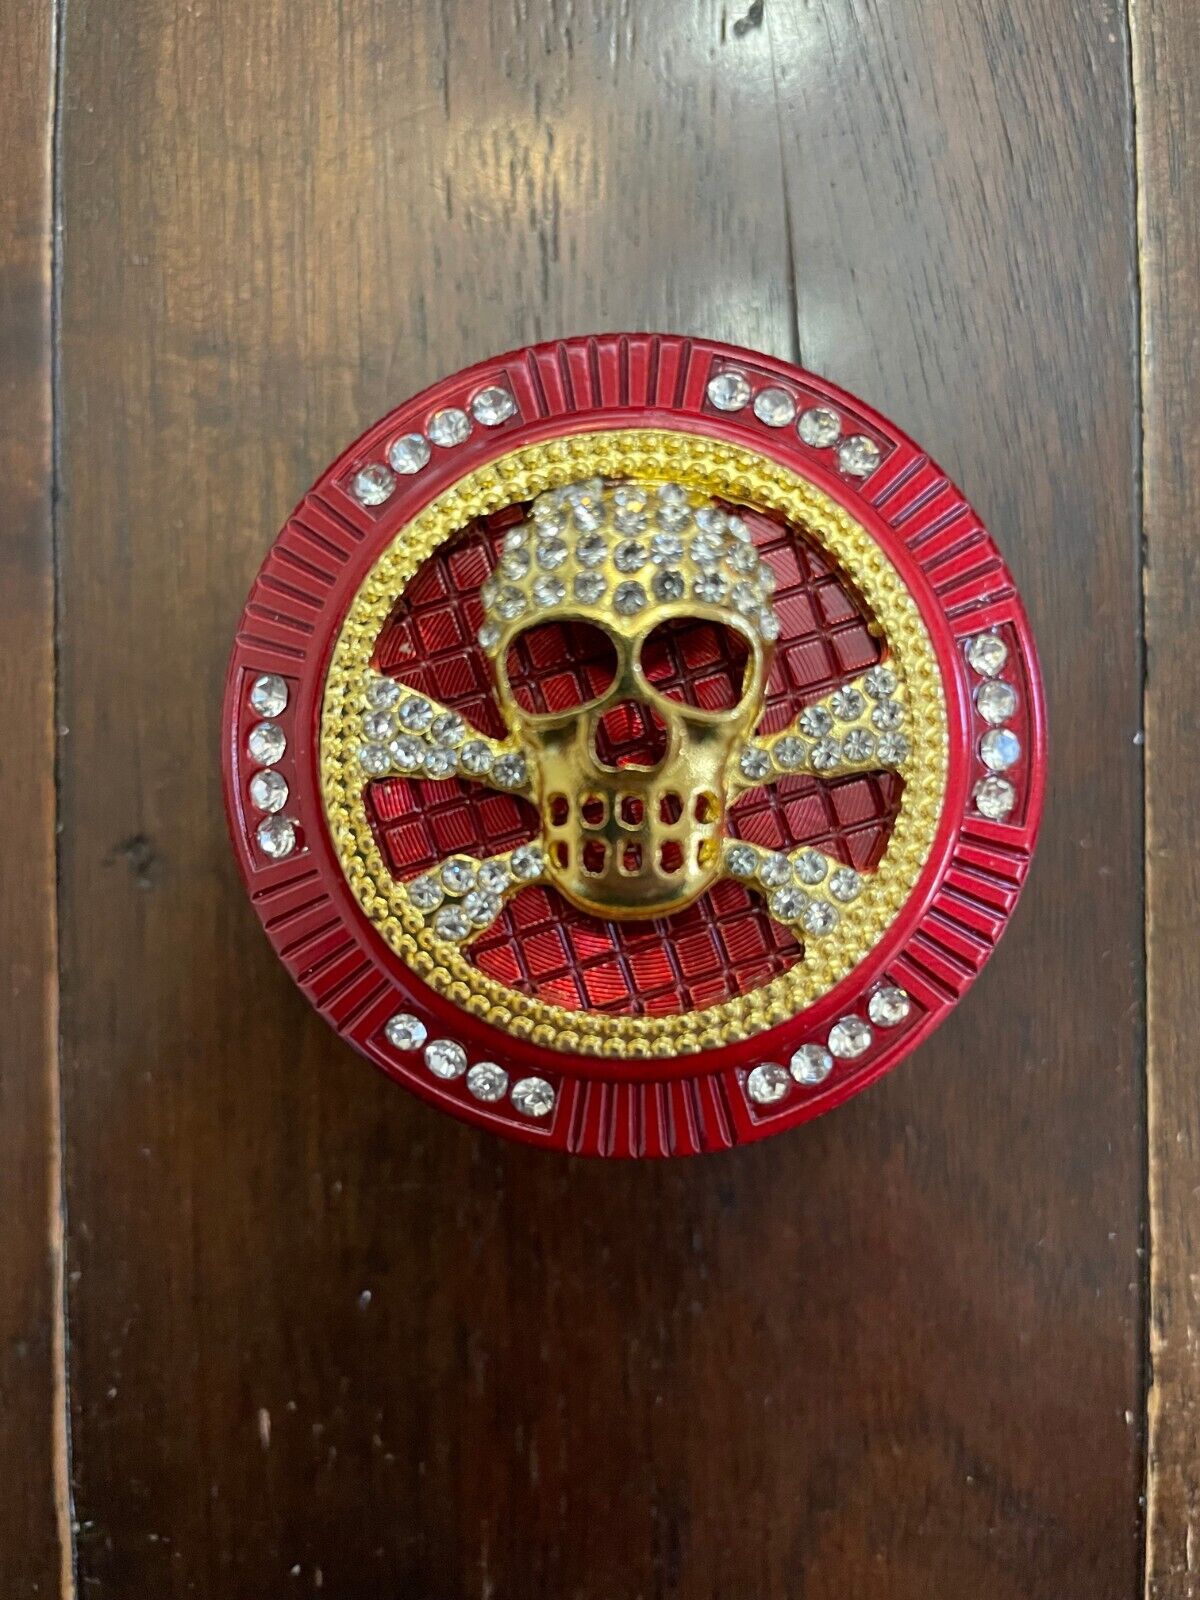 52MM Red Tobacco Herb Grinder -4 Piece- Jeweled Skull